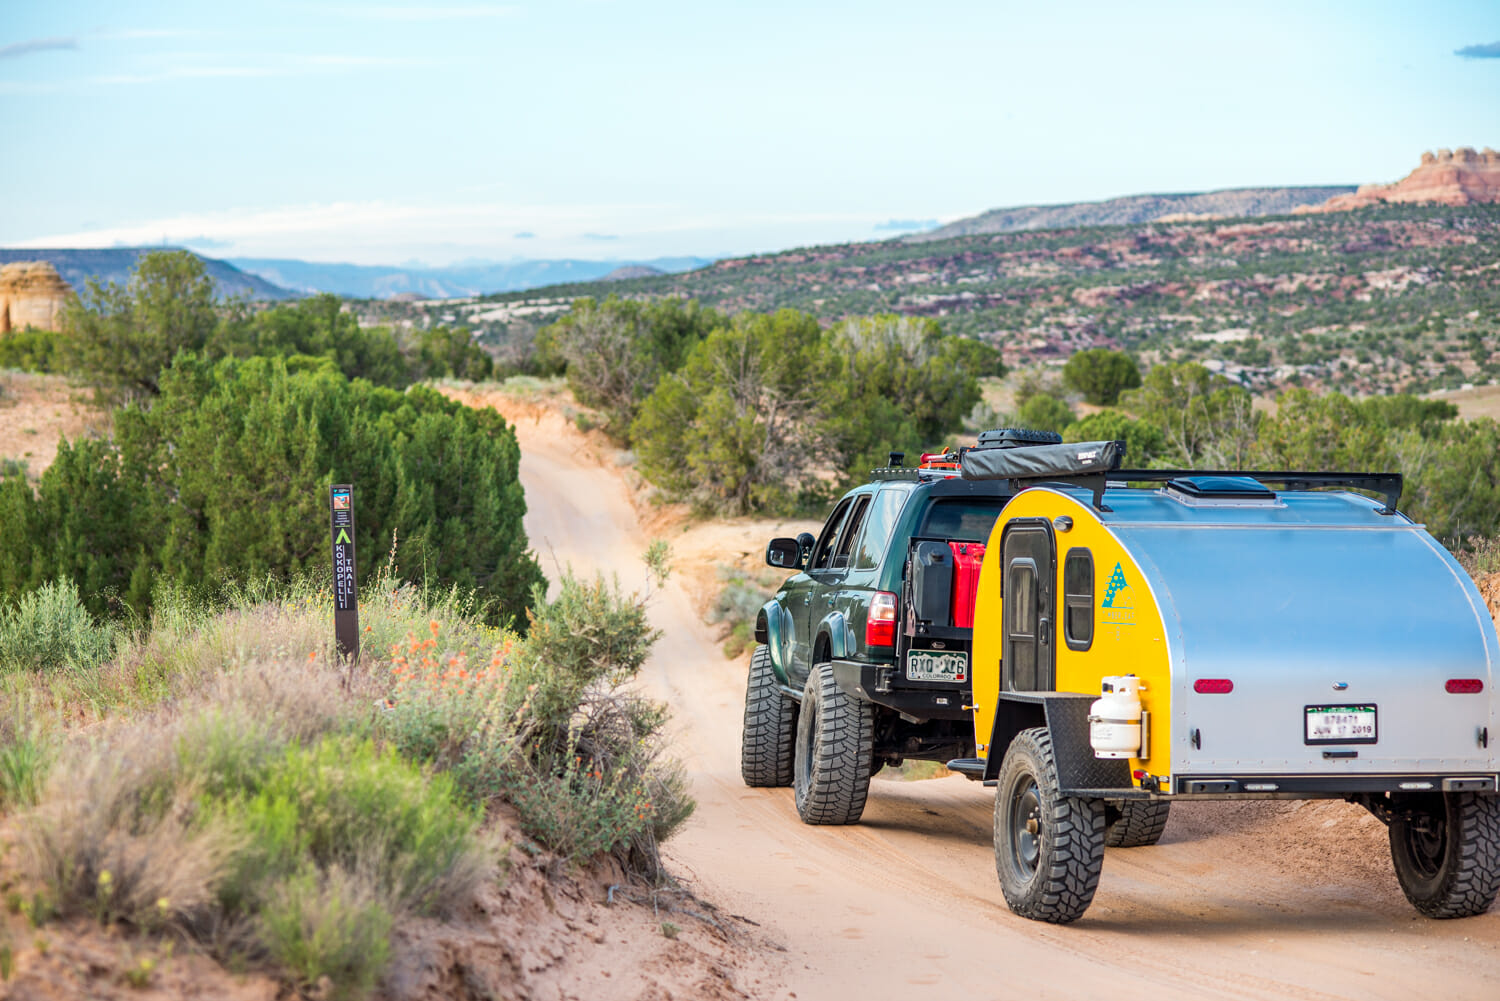 Go Off road in our teardrop trailers